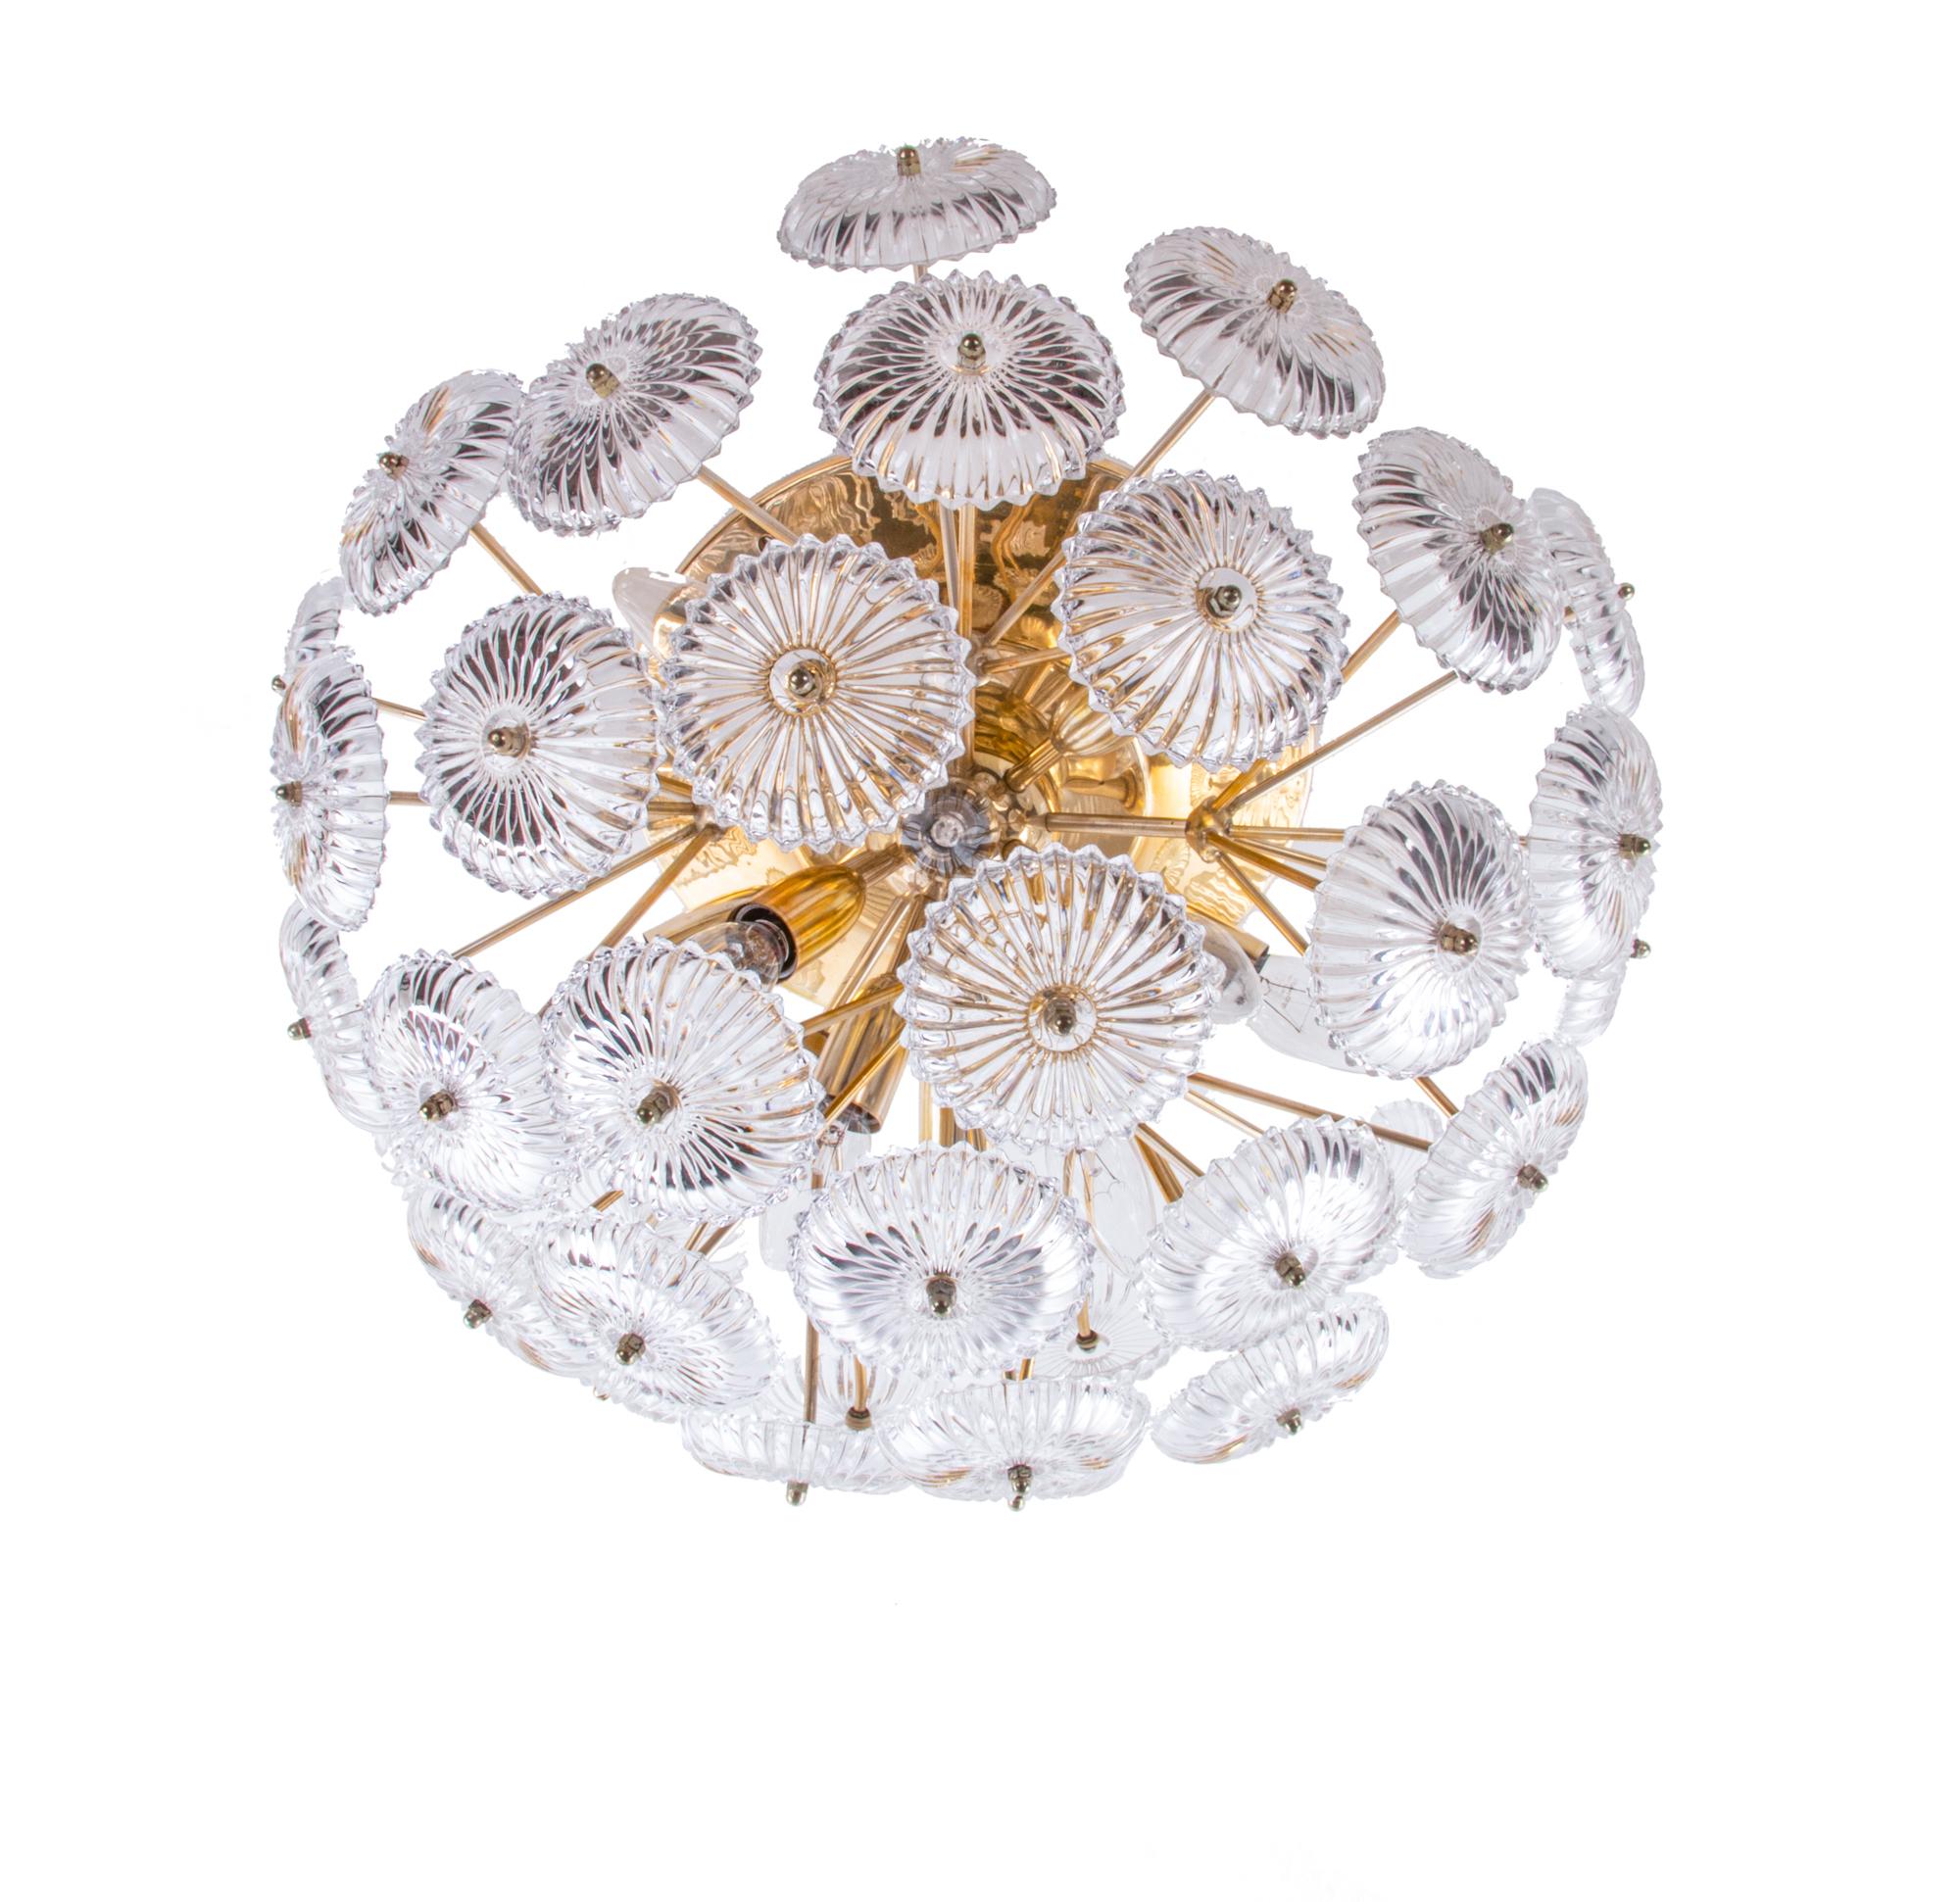 This stunning large and glamorous flush mount ceiling light has a high quality gilded brass base with thirty-six crystal glass flowers. Manufactured by Palwa, Germany in the 1960s. 

Measures: diameter 21.65